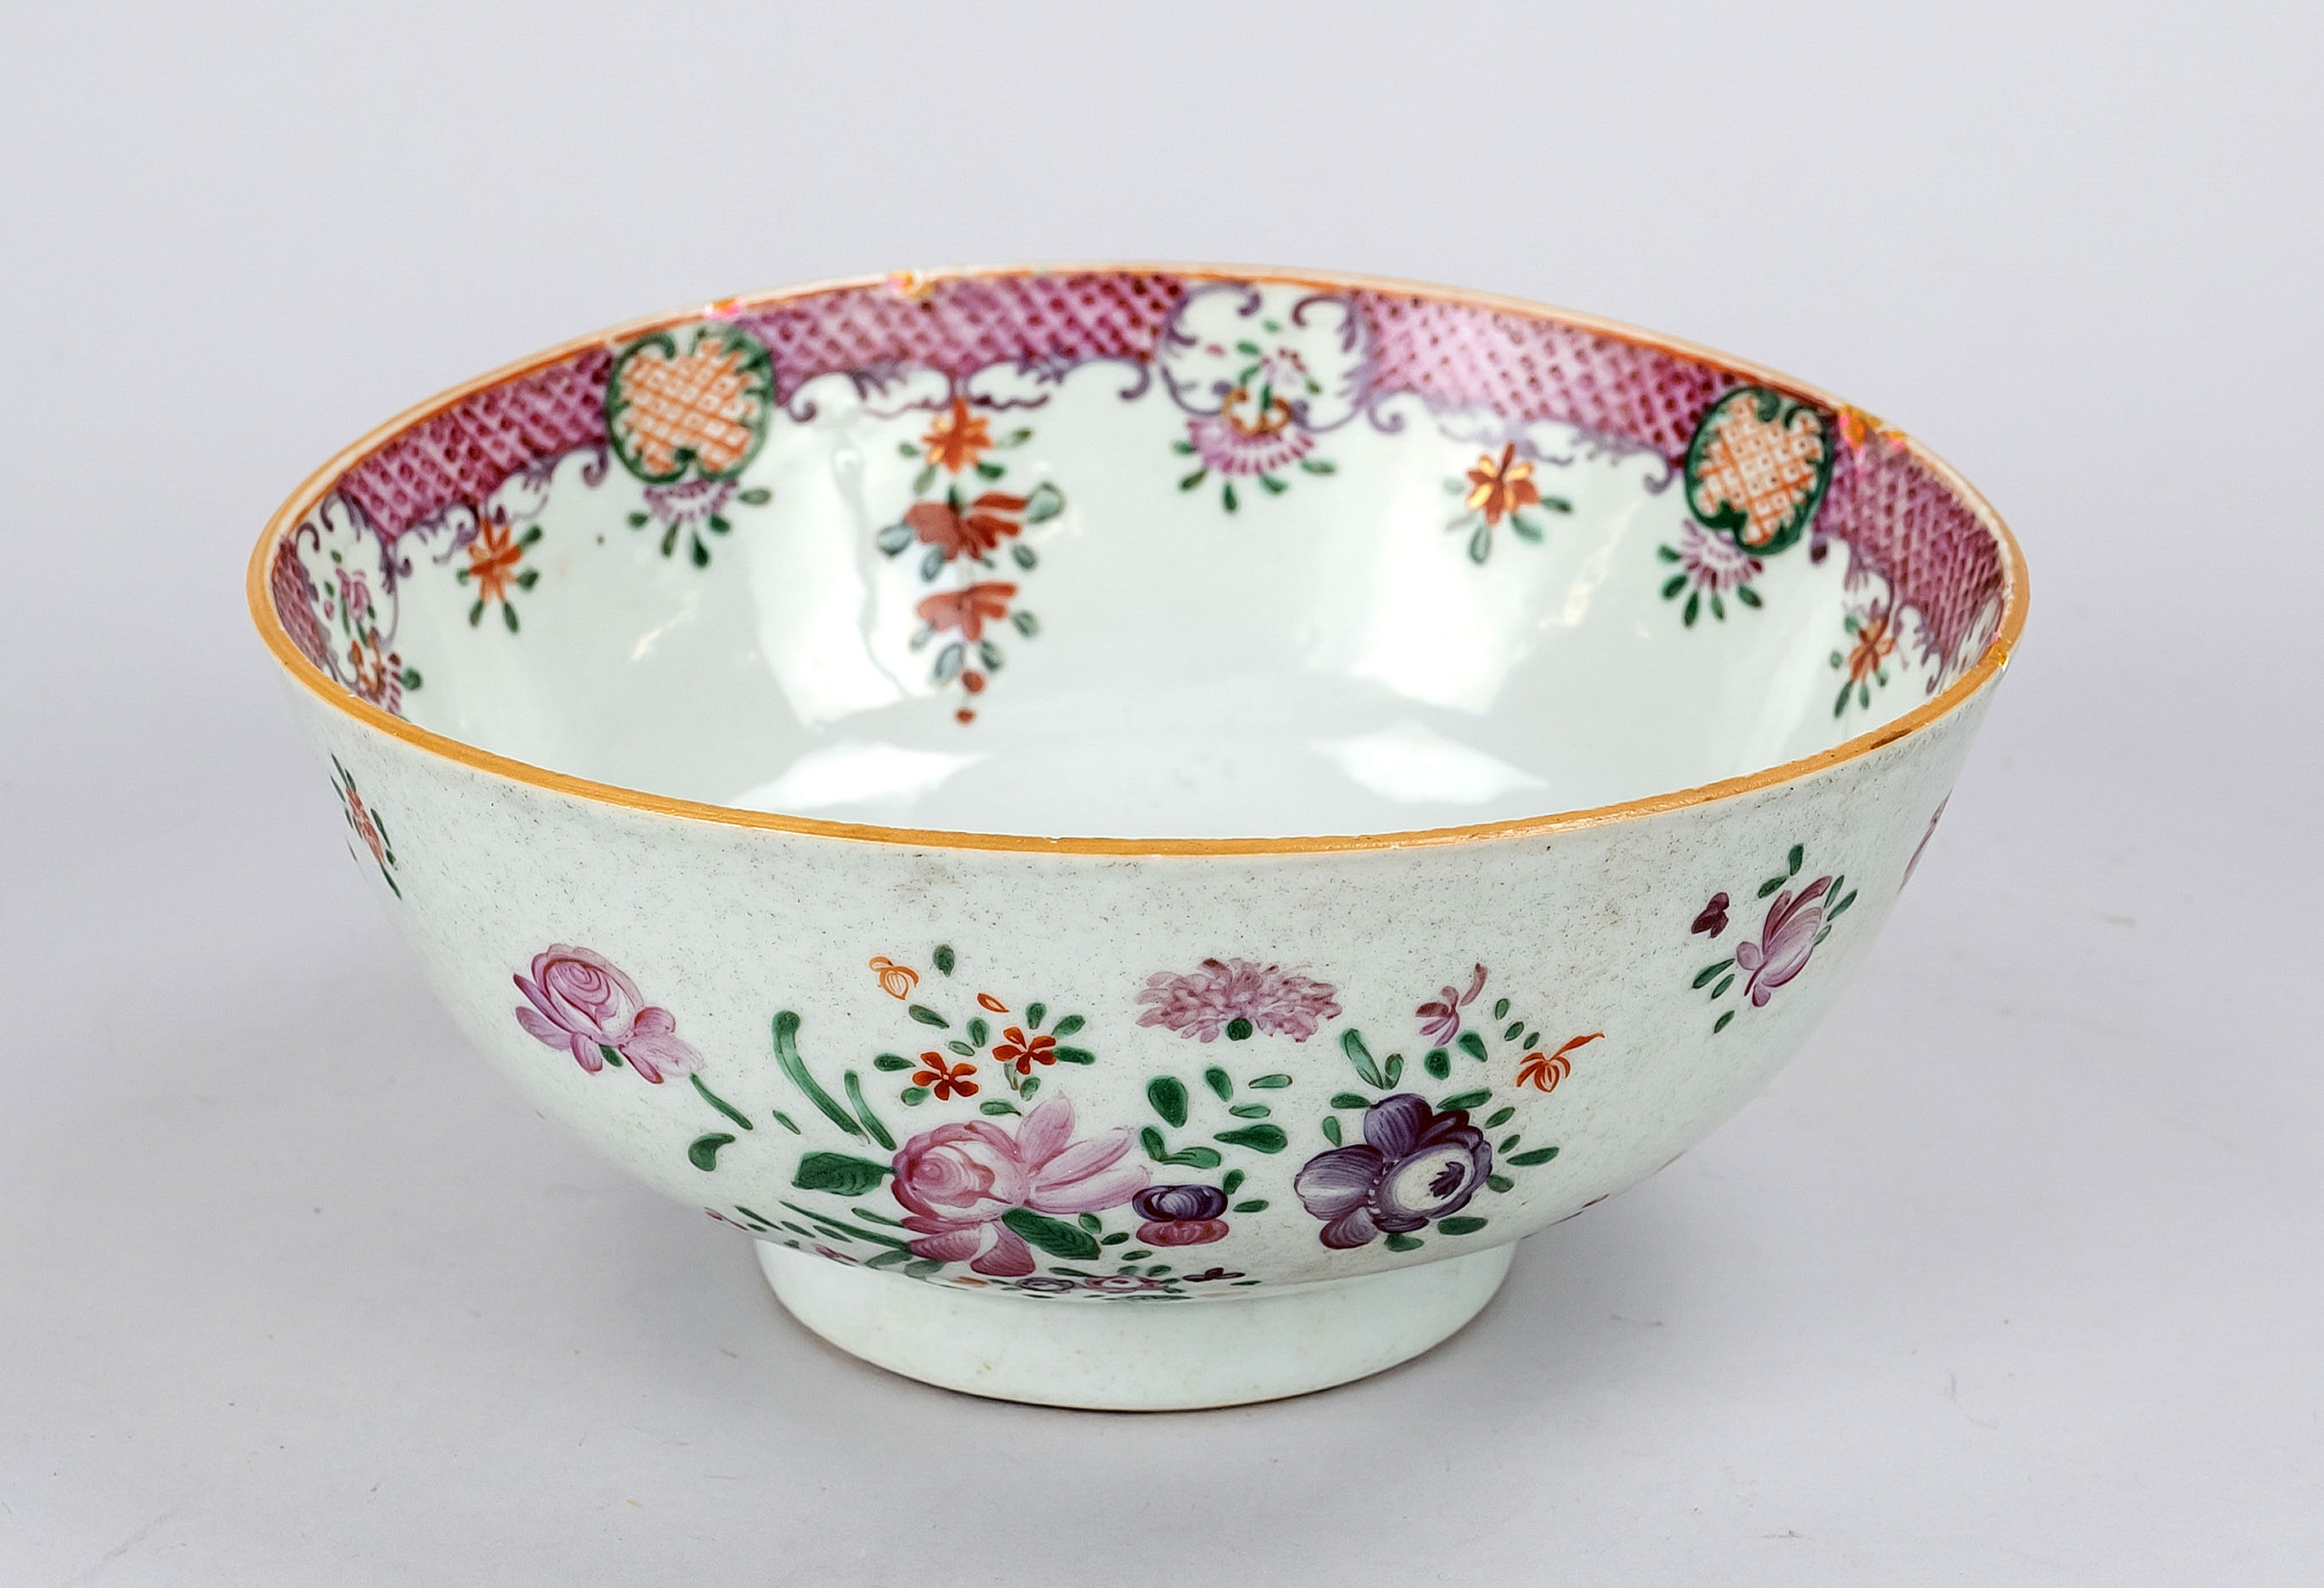 Flower bowl famille rose, China, Qing, Qianlong period(1735-1796), 18th century, porcelain with